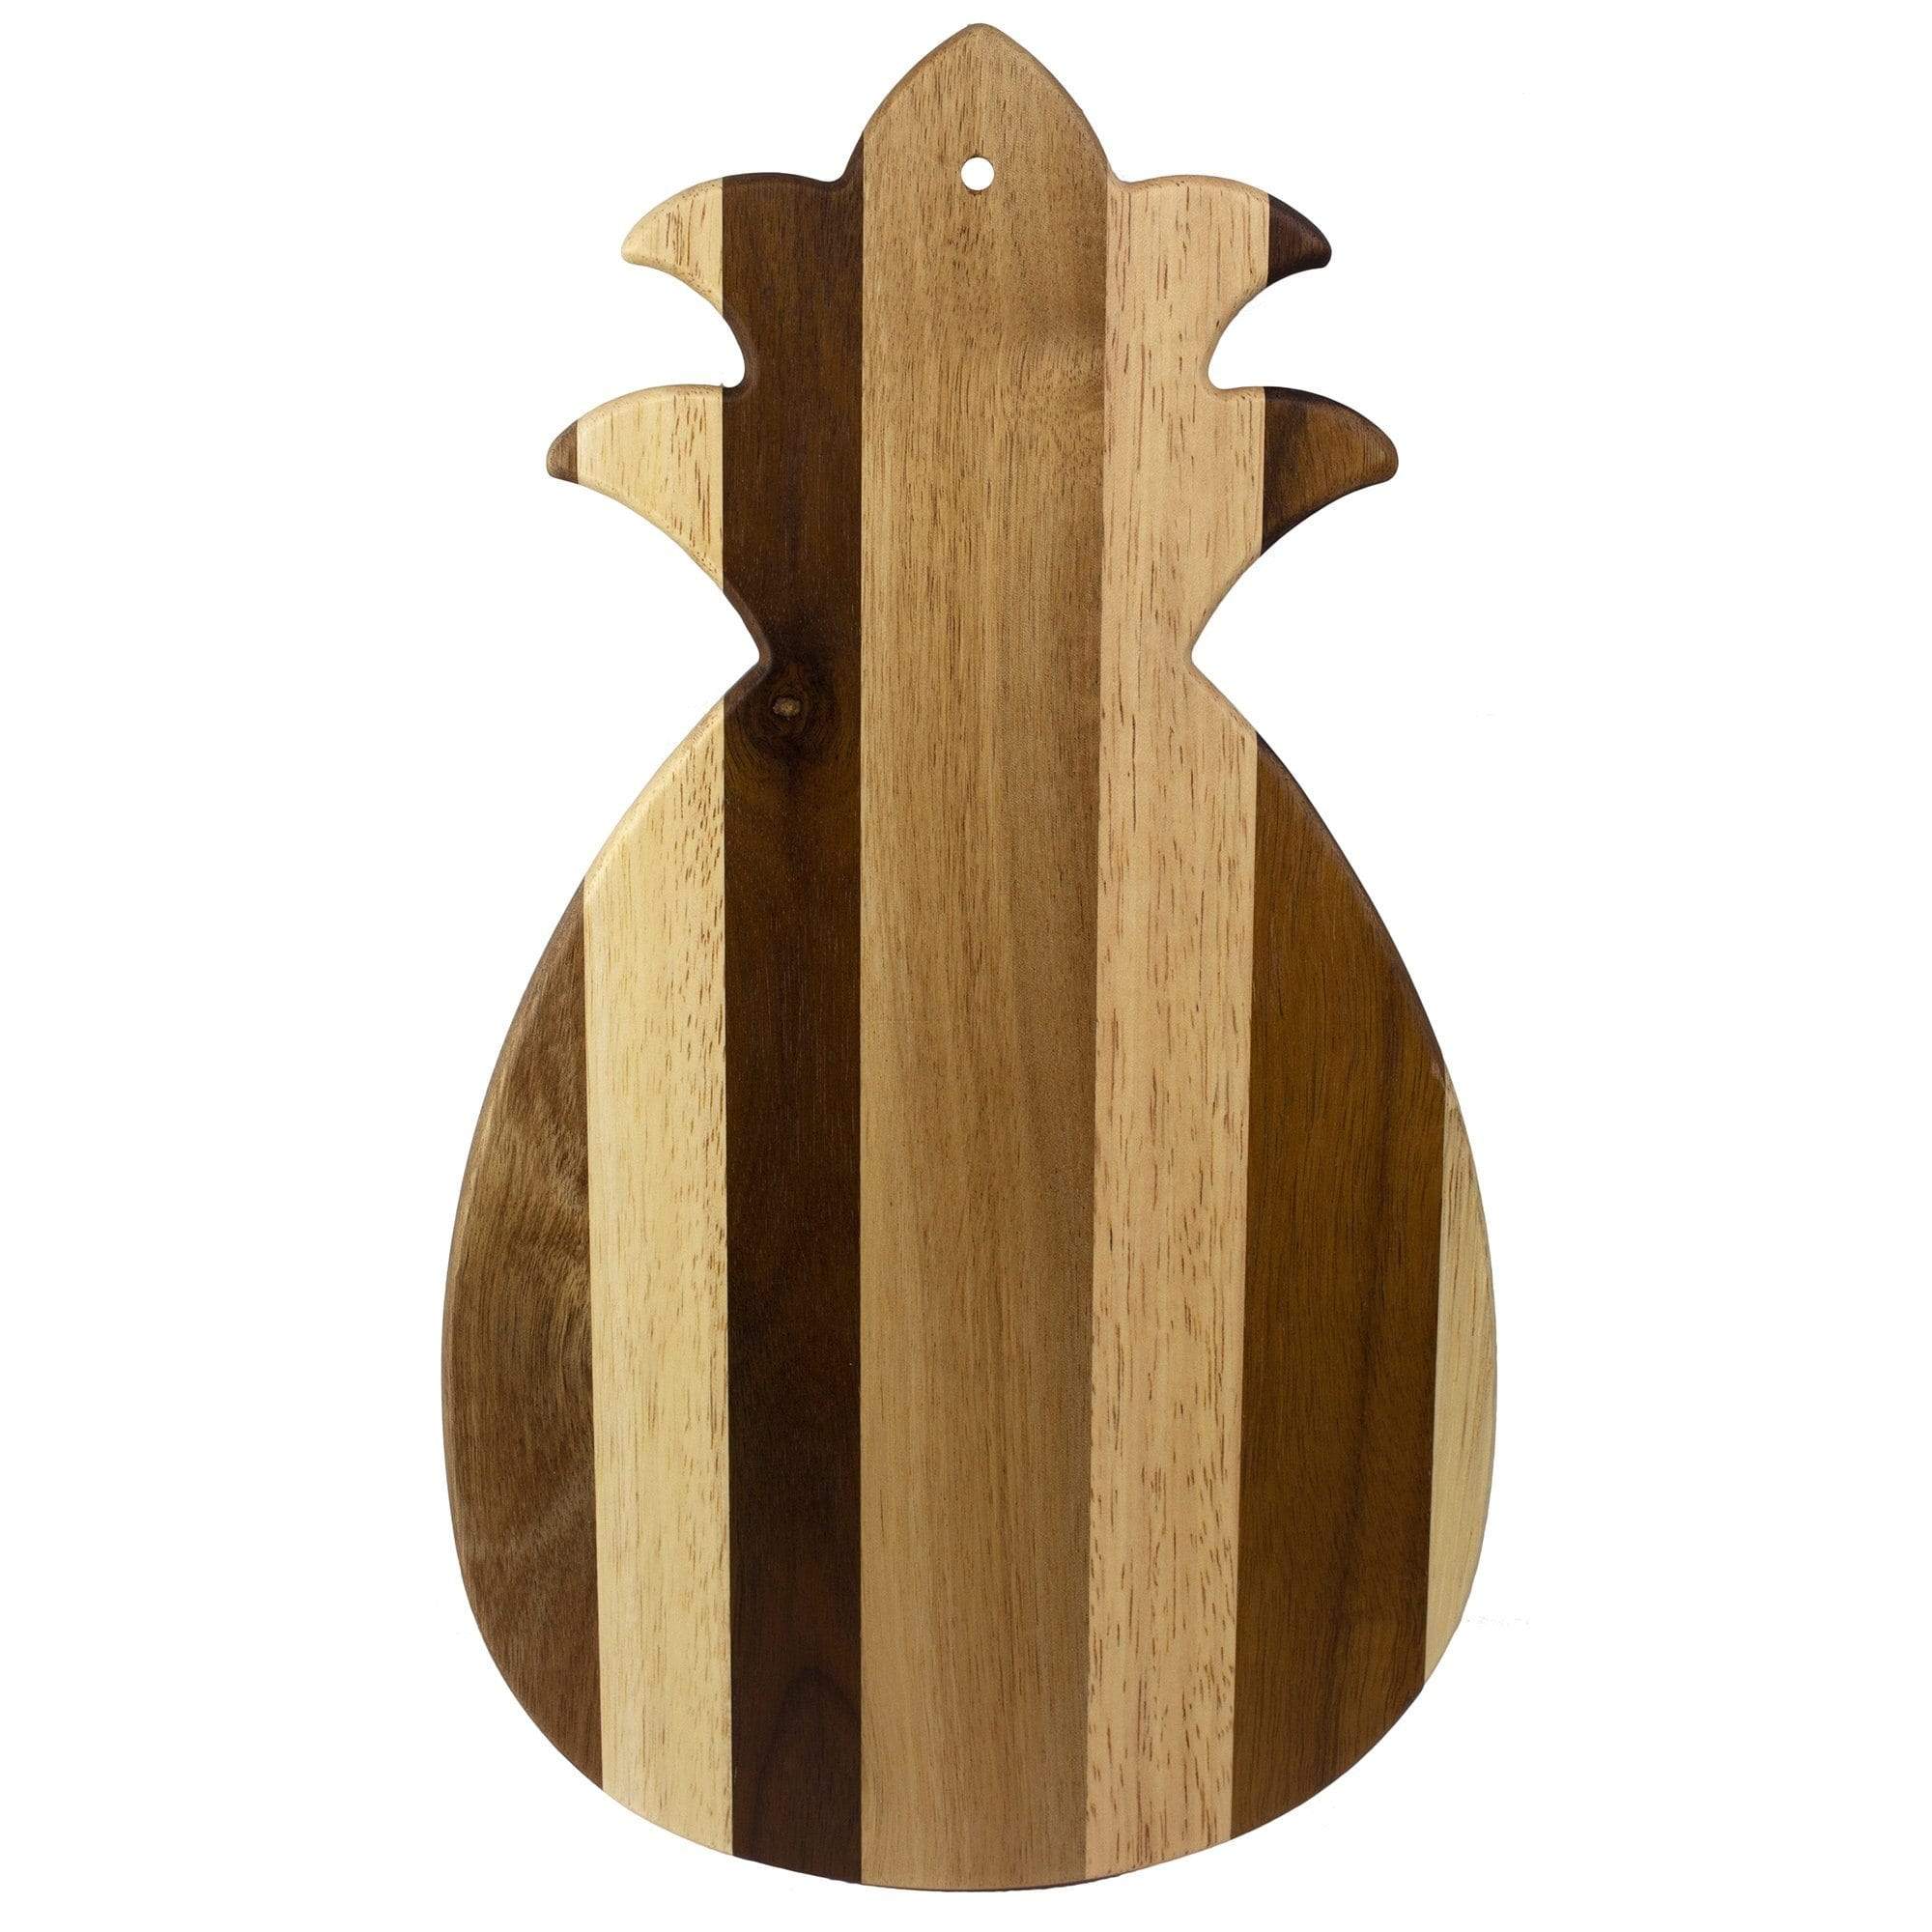 https://totallybamboo.com/cdn/shop/products/rock-branchr-shiplap-series-pineapple-shaped-wood-serving-and-cutting-board-totally-bamboo-921020.jpg?v=1628013858